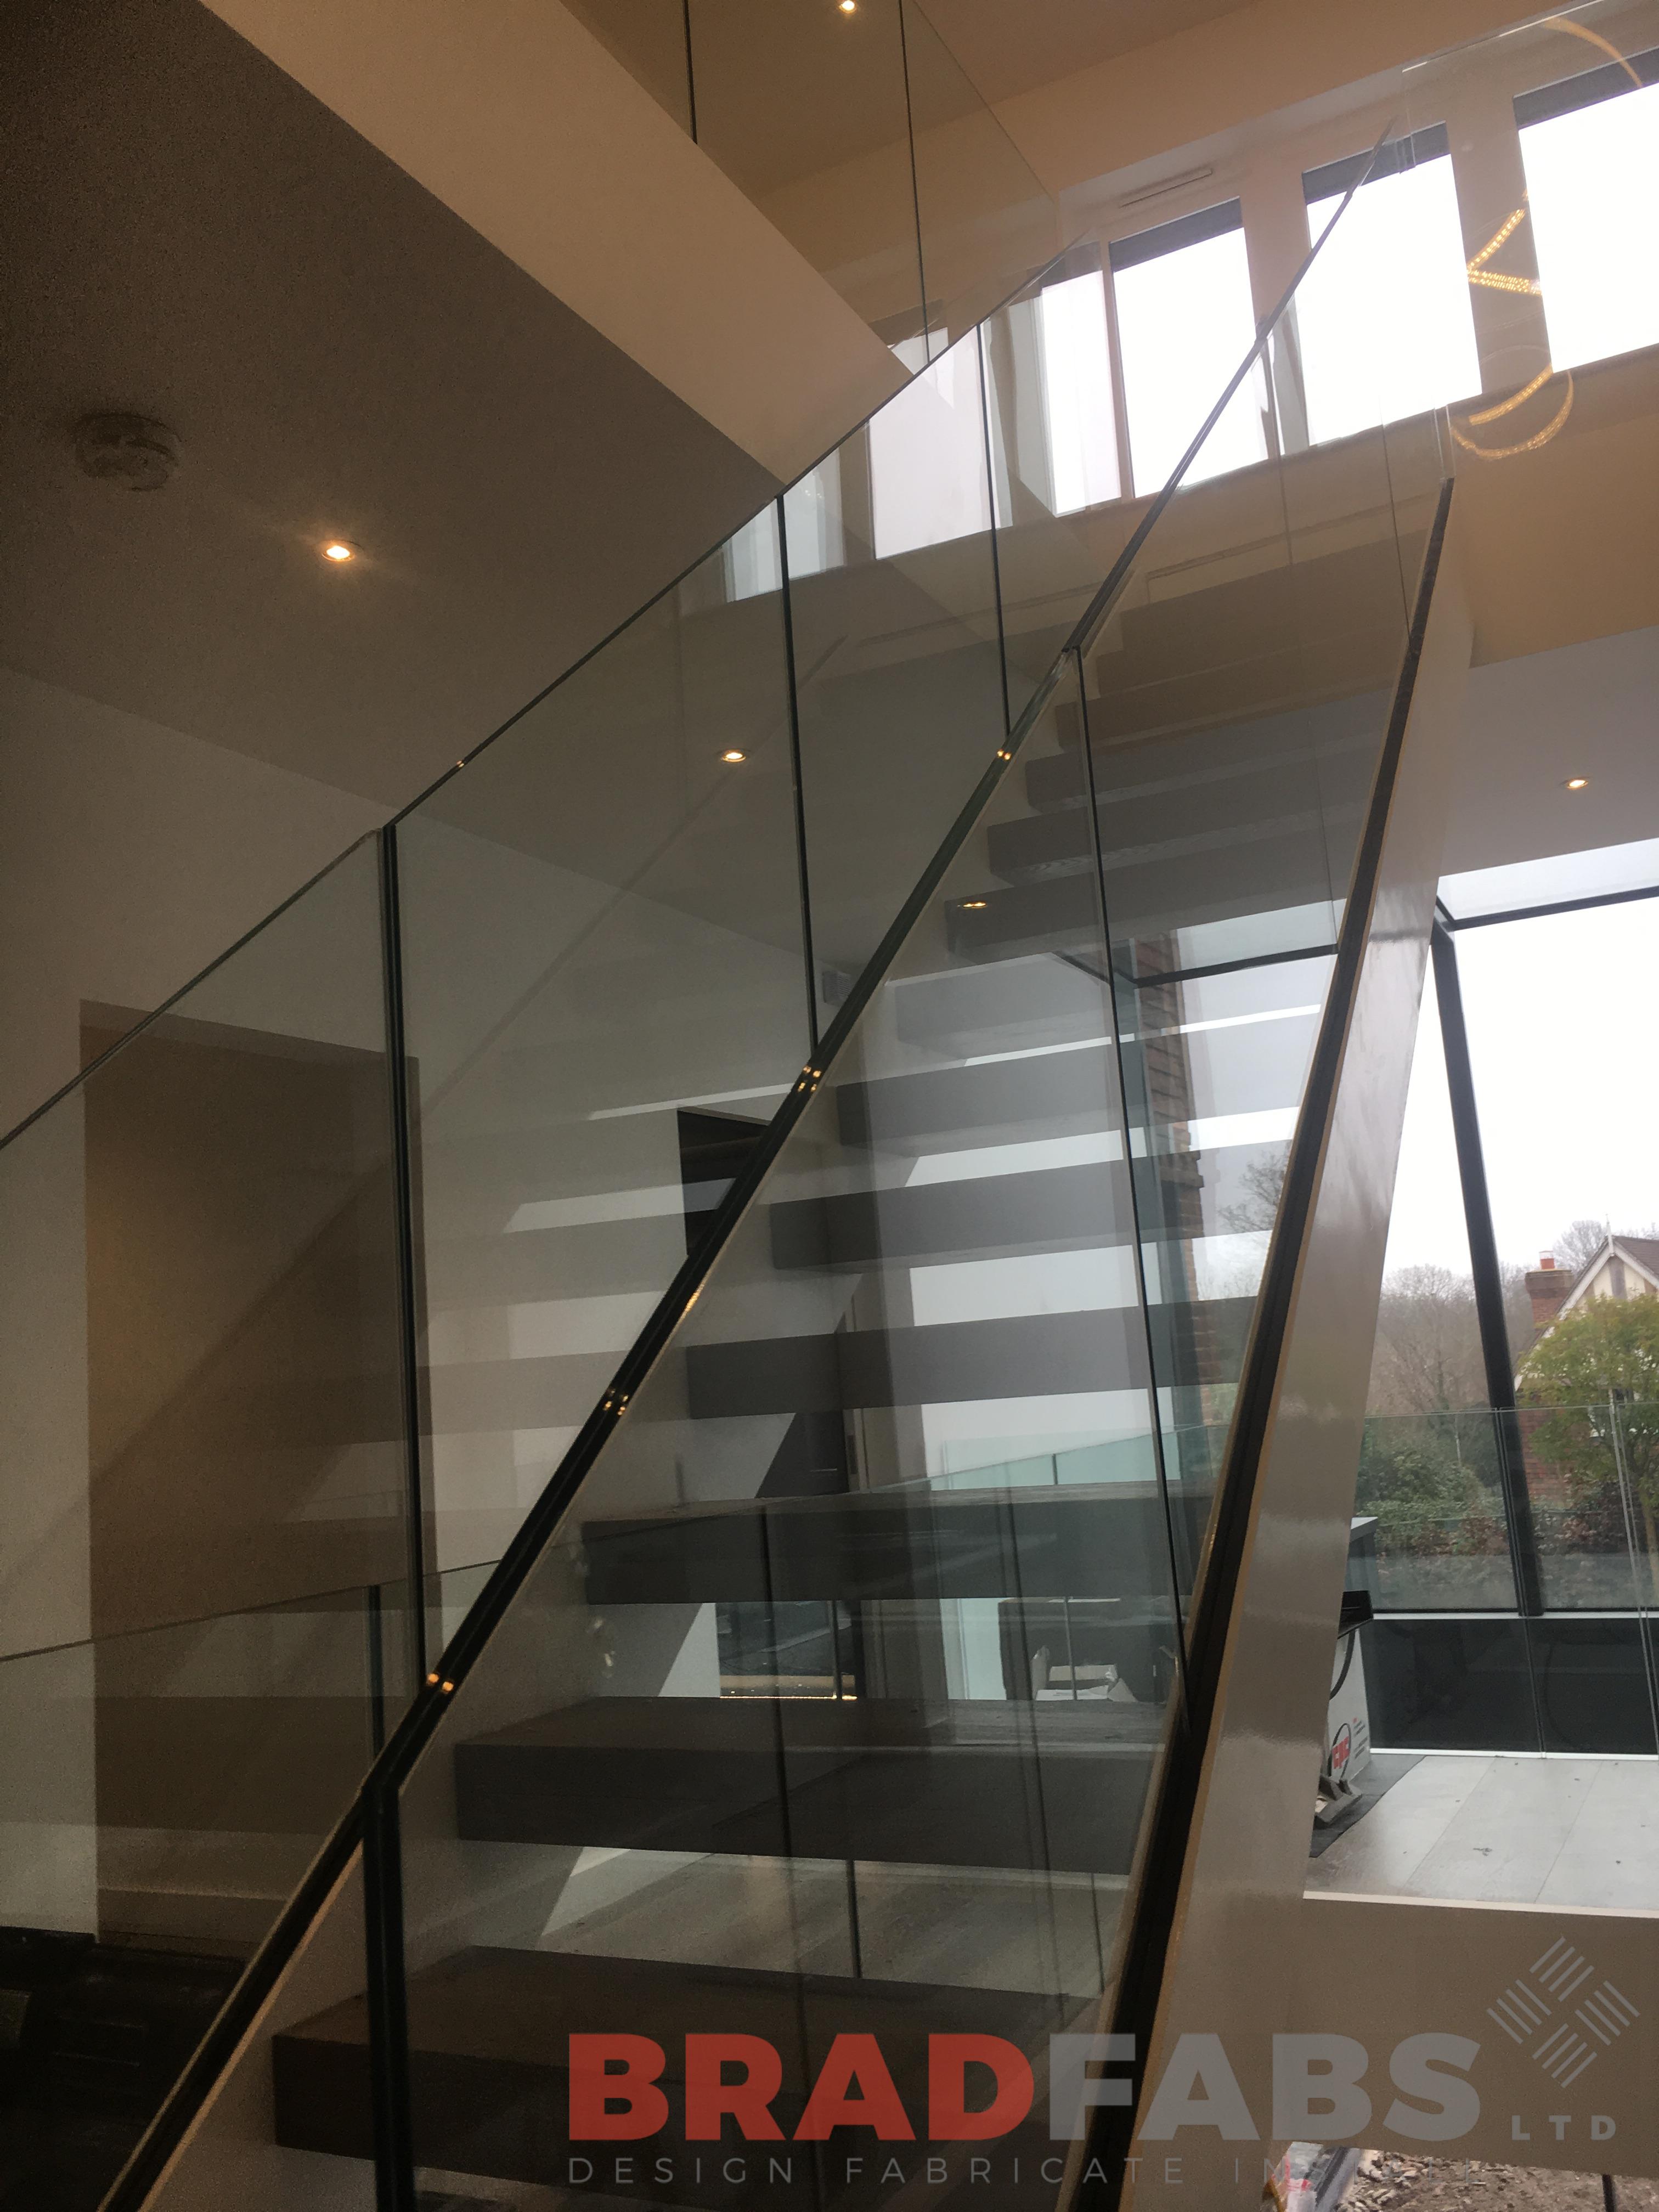 Straight staircase manufactured and designed by Bradfabs